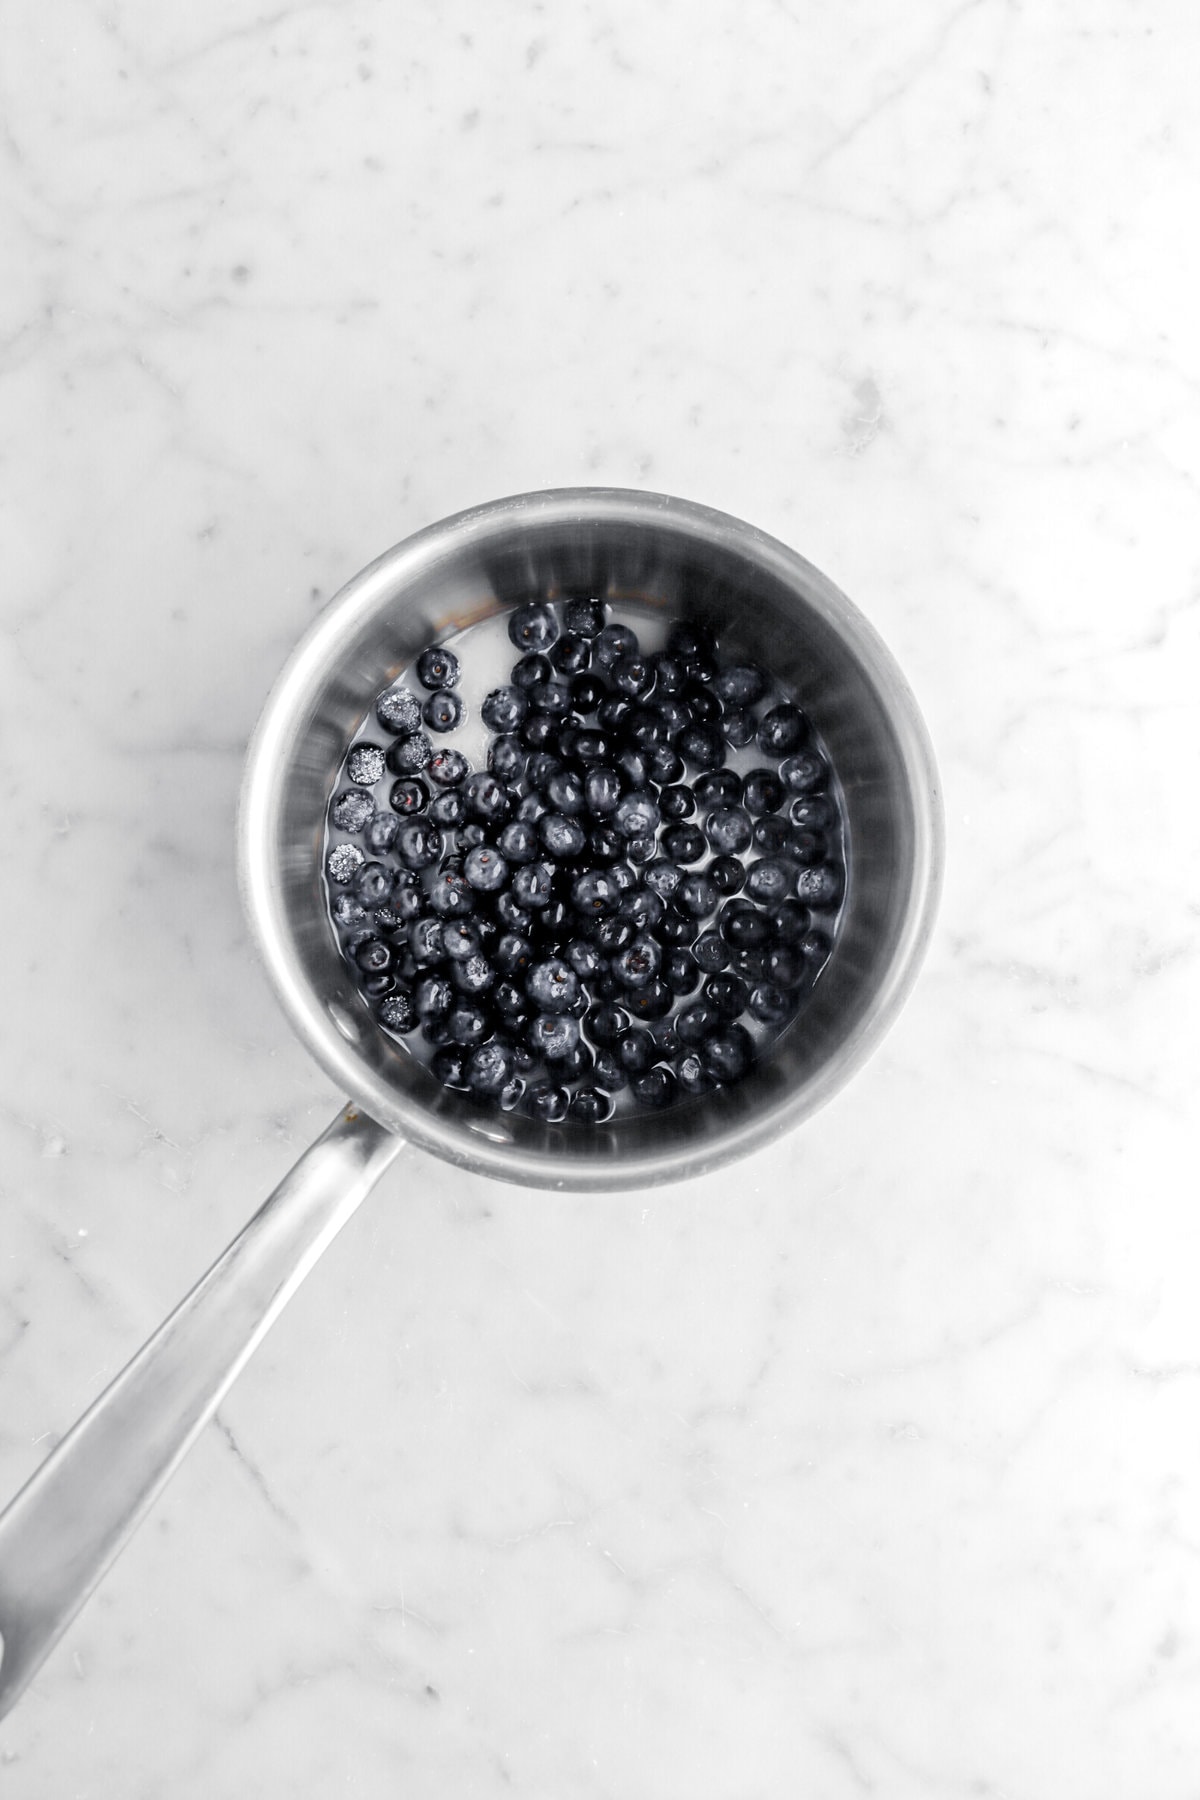 pot of blueberries, sugar, and water on marble surface.